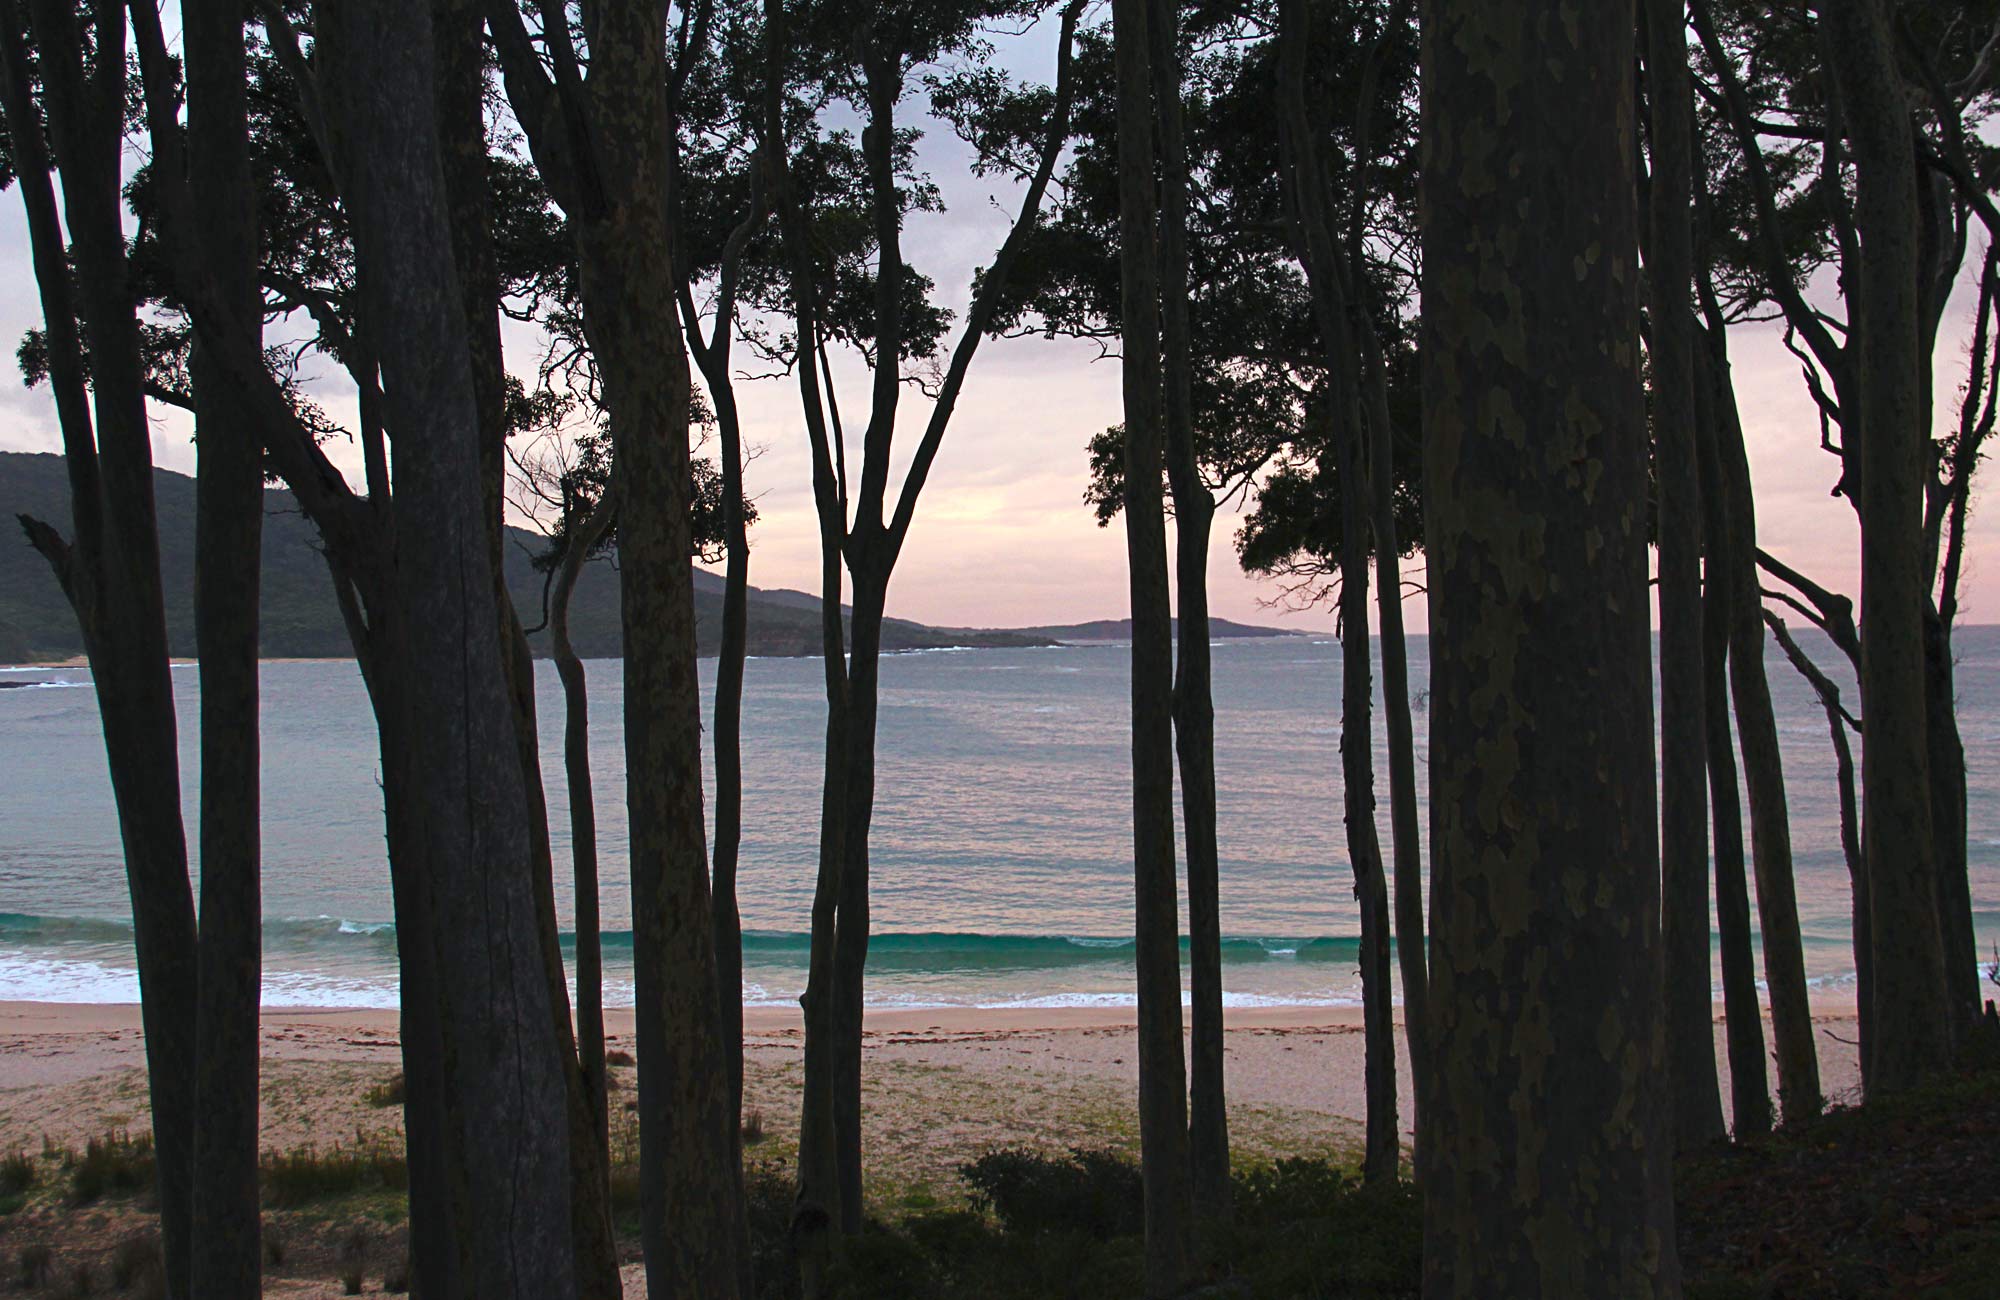 Looking through the trees out to sea on sunset. Photo:John Yurasek